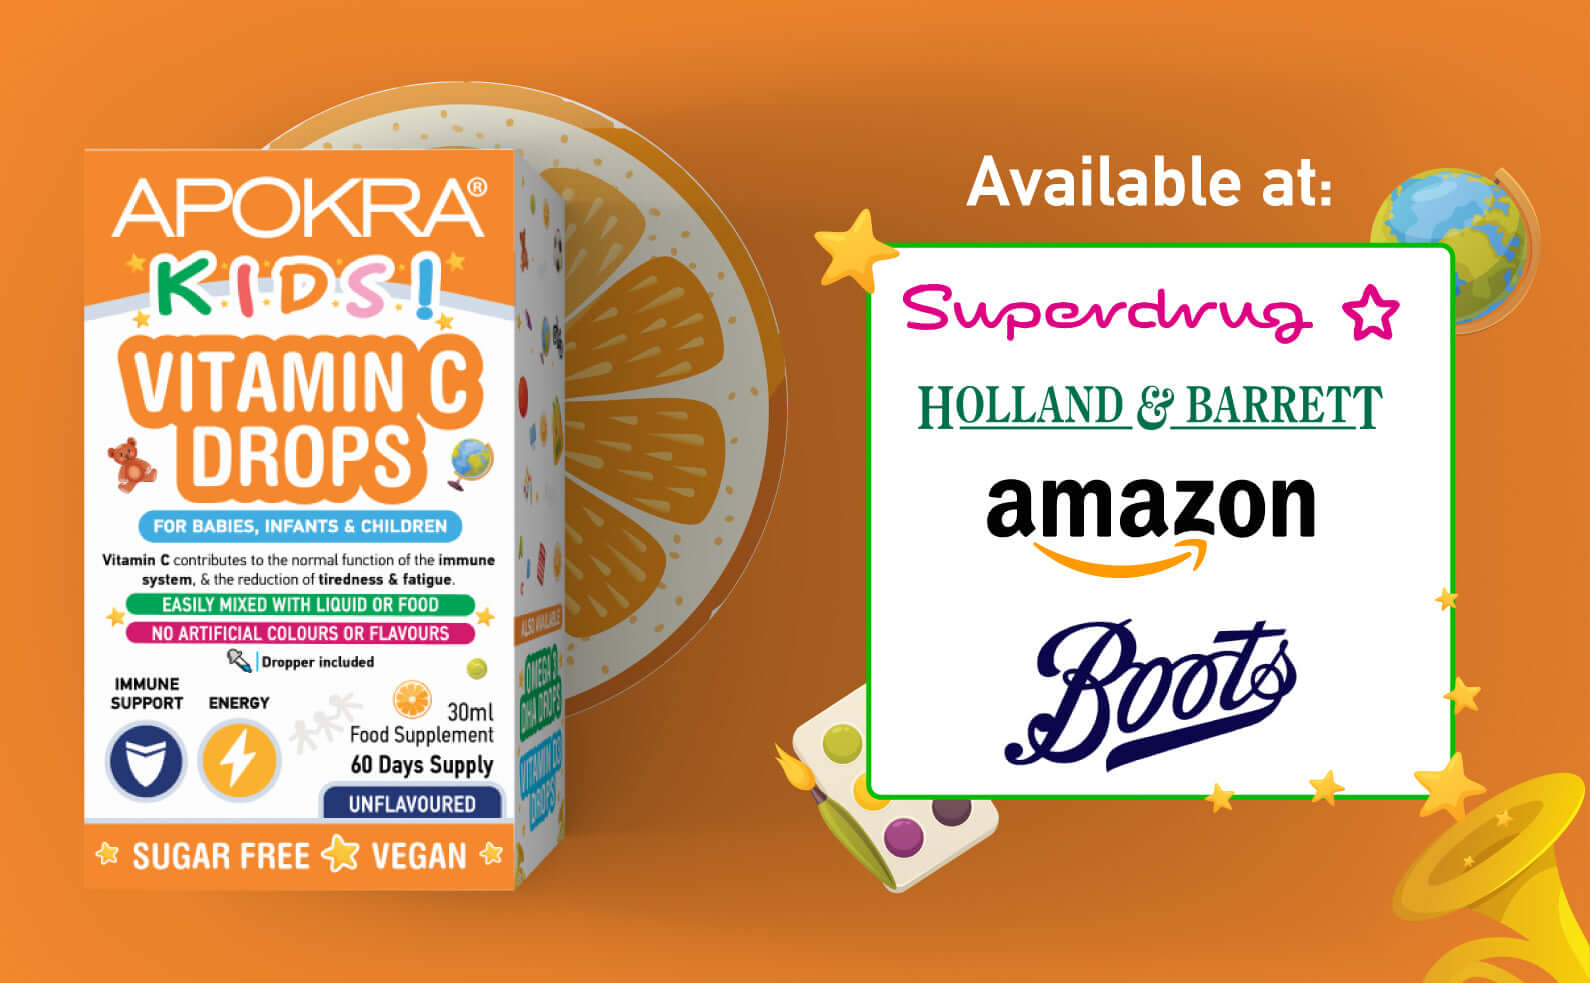 APOKRA Vitamin C Drops available at Boots, Superdrug, Amazon and Holland & Barrett